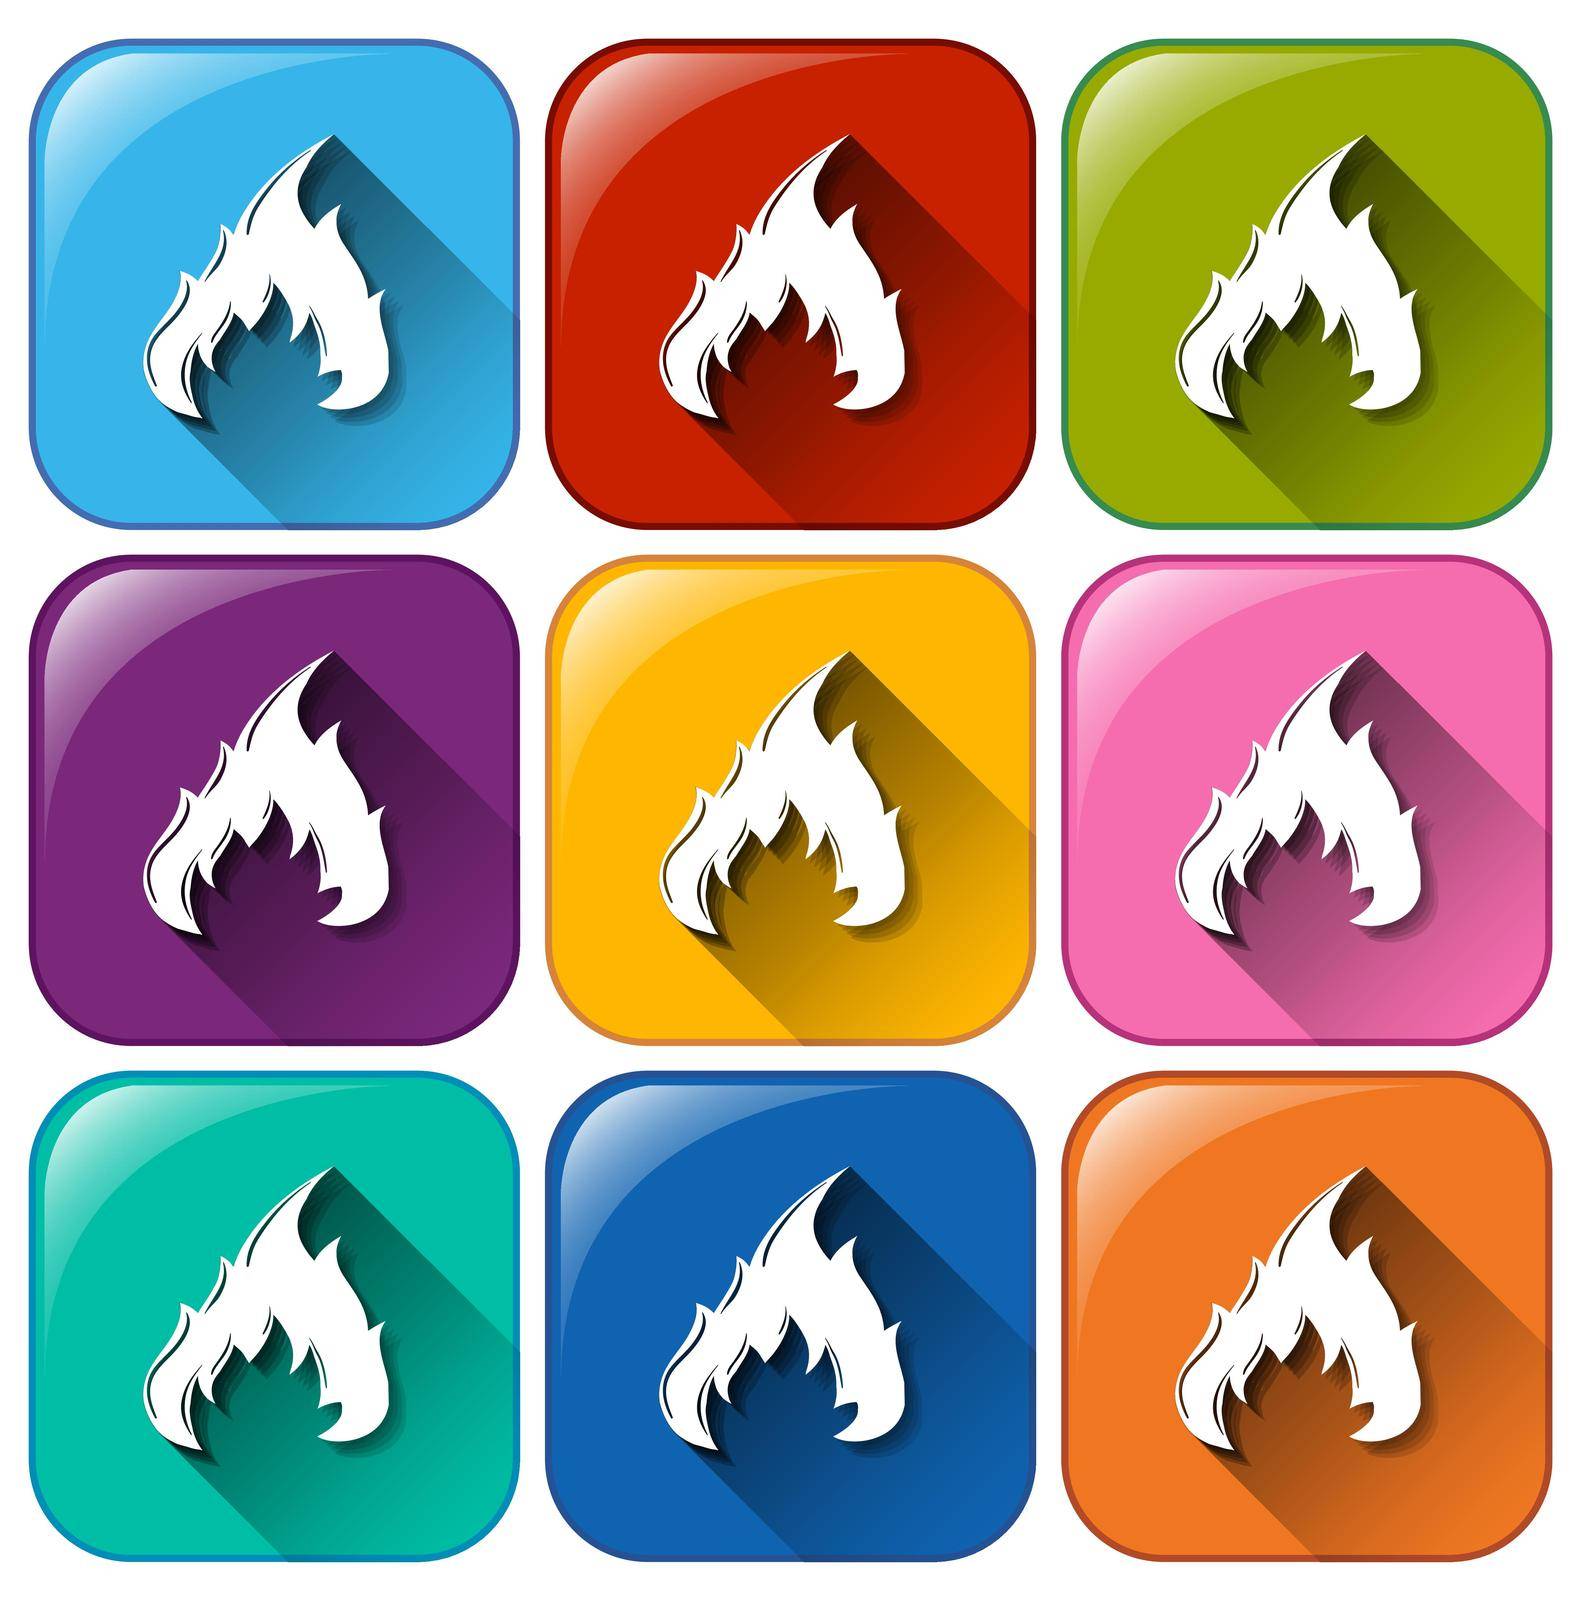 Buttons with flames on a white background